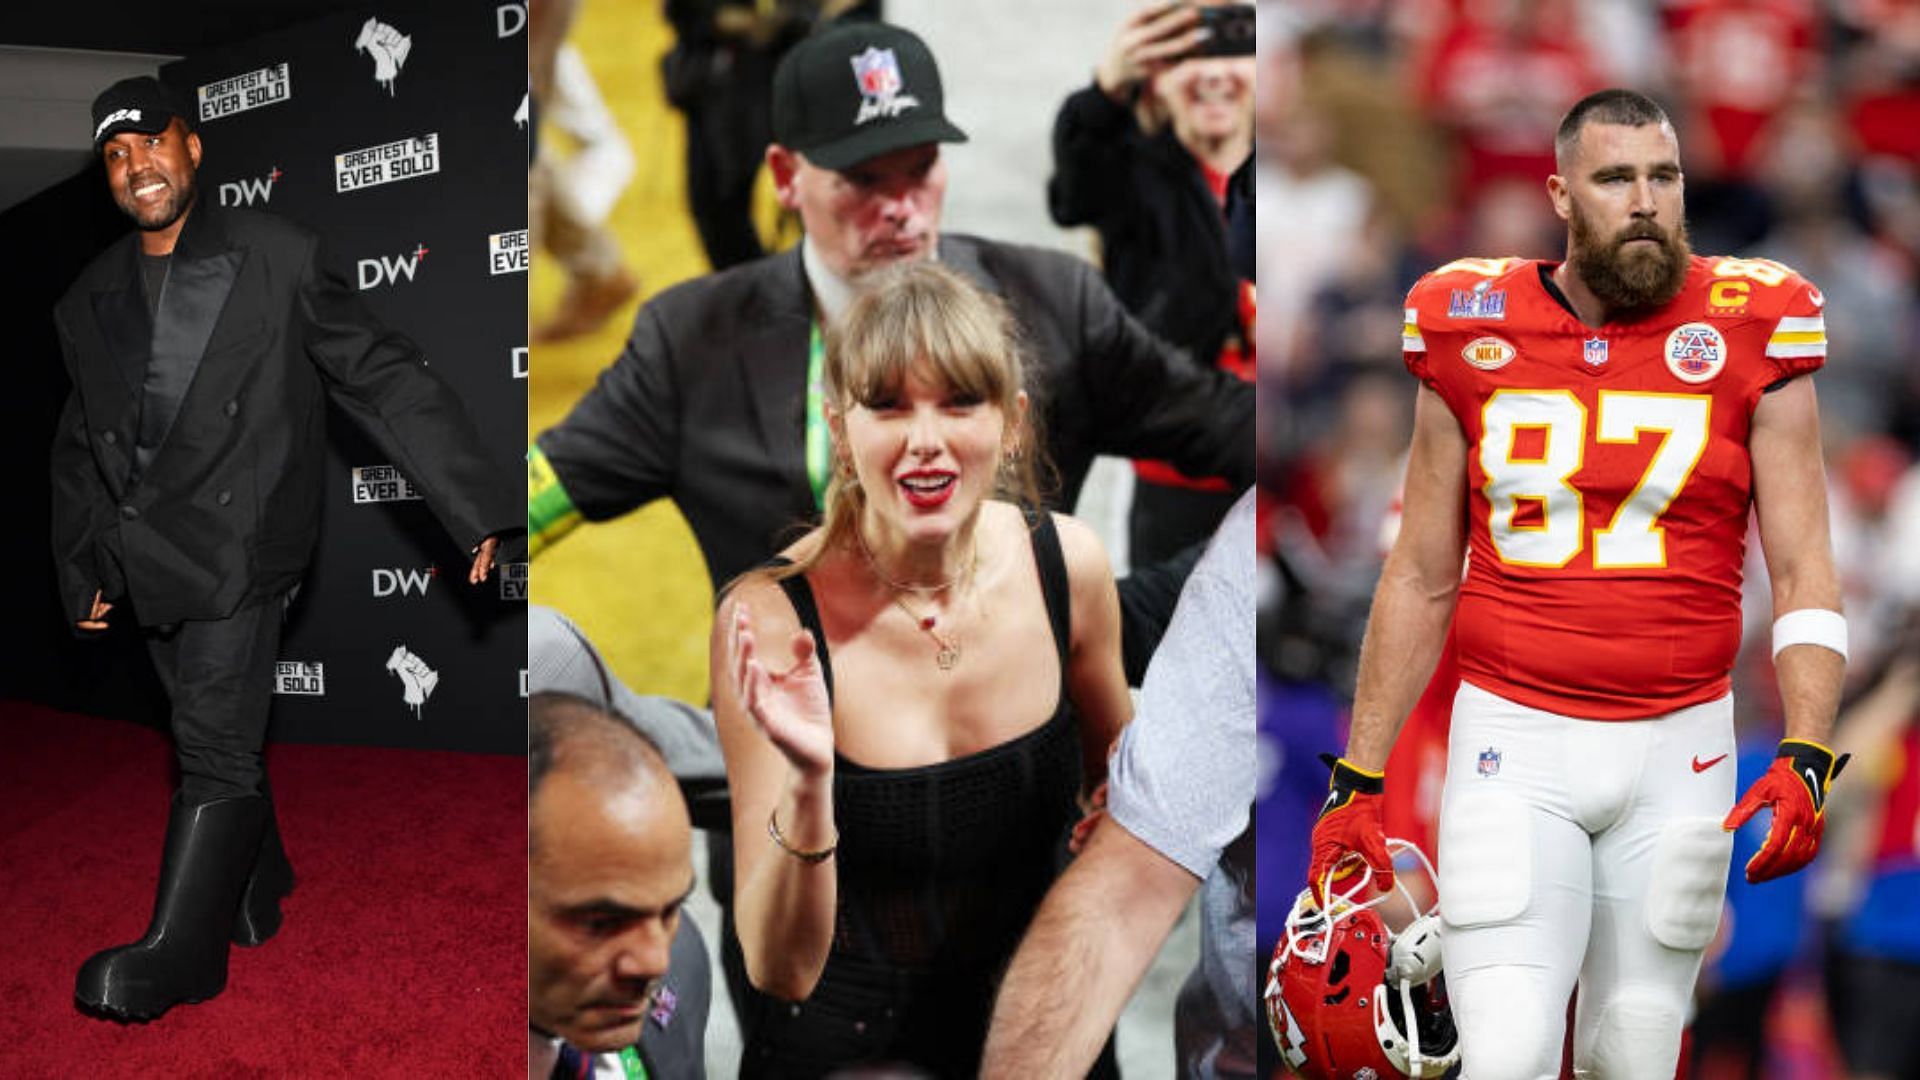 Kanye West is disputing rumors that Taylor Swift had him kicked out of the Super Bowl.